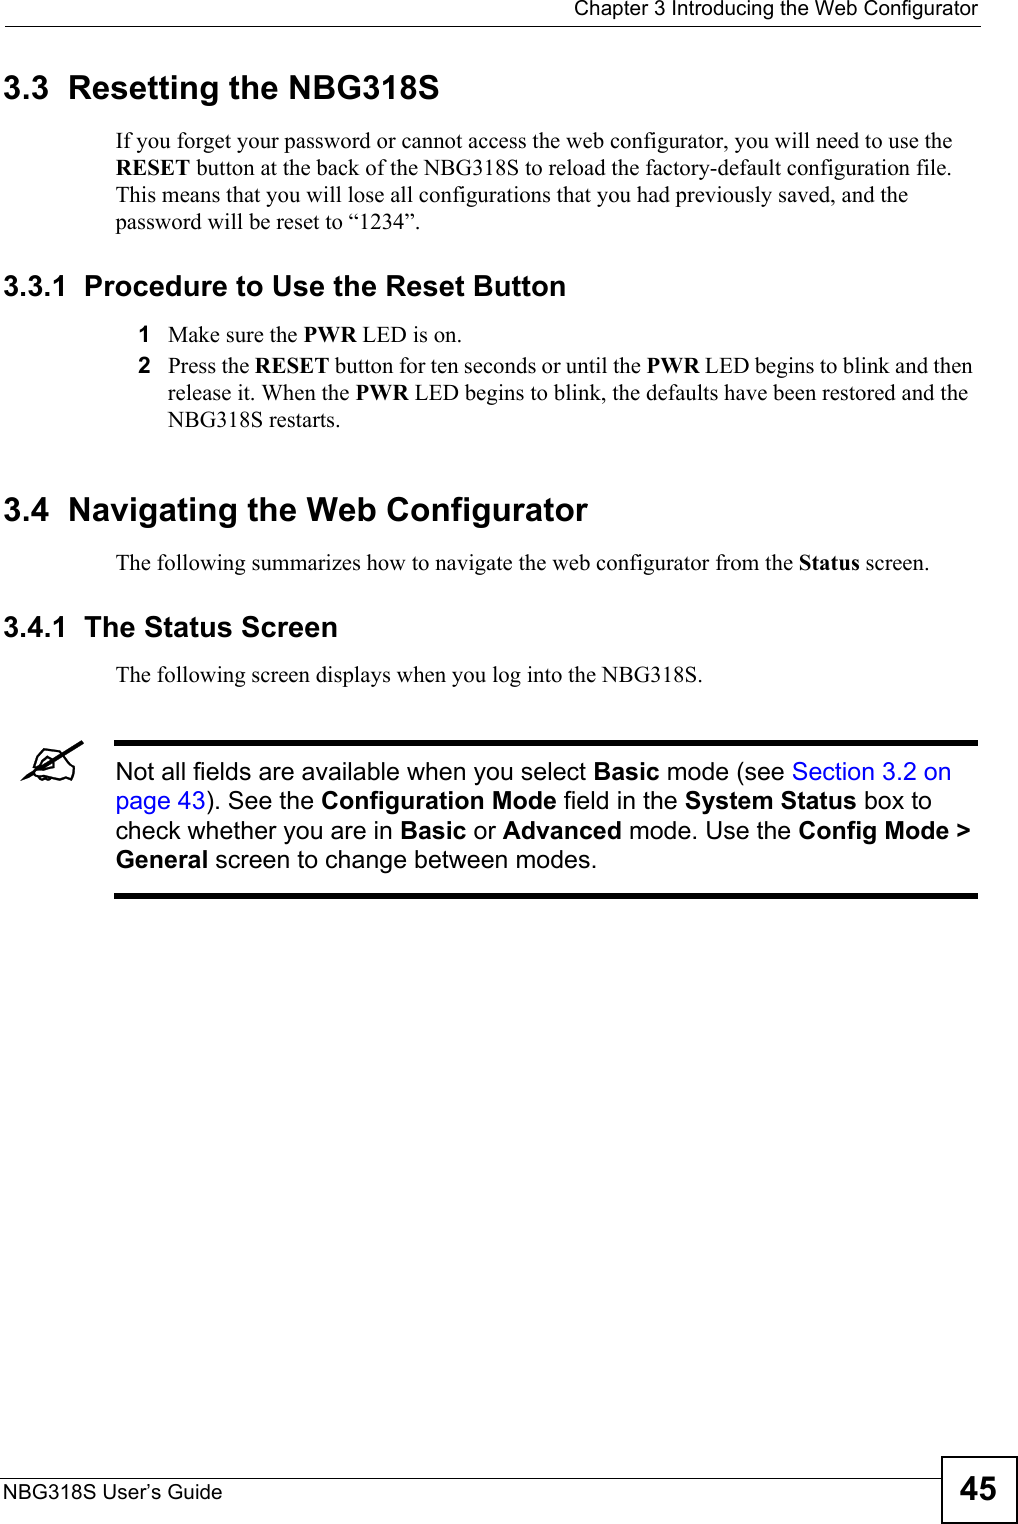  Chapter 3 Introducing the Web ConfiguratorNBG318S User’s Guide 453.3  Resetting the NBG318SIf you forget your password or cannot access the web configurator, you will need to use the RESET button at the back of the NBG318S to reload the factory-default configuration file. This means that you will lose all configurations that you had previously saved, and the password will be reset to “1234”.3.3.1  Procedure to Use the Reset Button1Make sure the PWR LED is on.2Press the RESET button for ten seconds or until the PWR LED begins to blink and then release it. When the PWR LED begins to blink, the defaults have been restored and the NBG318S restarts.3.4  Navigating the Web Configurator    The following summarizes how to navigate the web configurator from the Status screen. 3.4.1  The Status Screen The following screen displays when you log into the NBG318S.&quot;Not all fields are available when you select Basic mode (see Section 3.2 on page 43). See the Configuration Mode field in the System Status box to check whether you are in Basic or Advanced mode. Use the Config Mode &gt; General screen to change between modes.